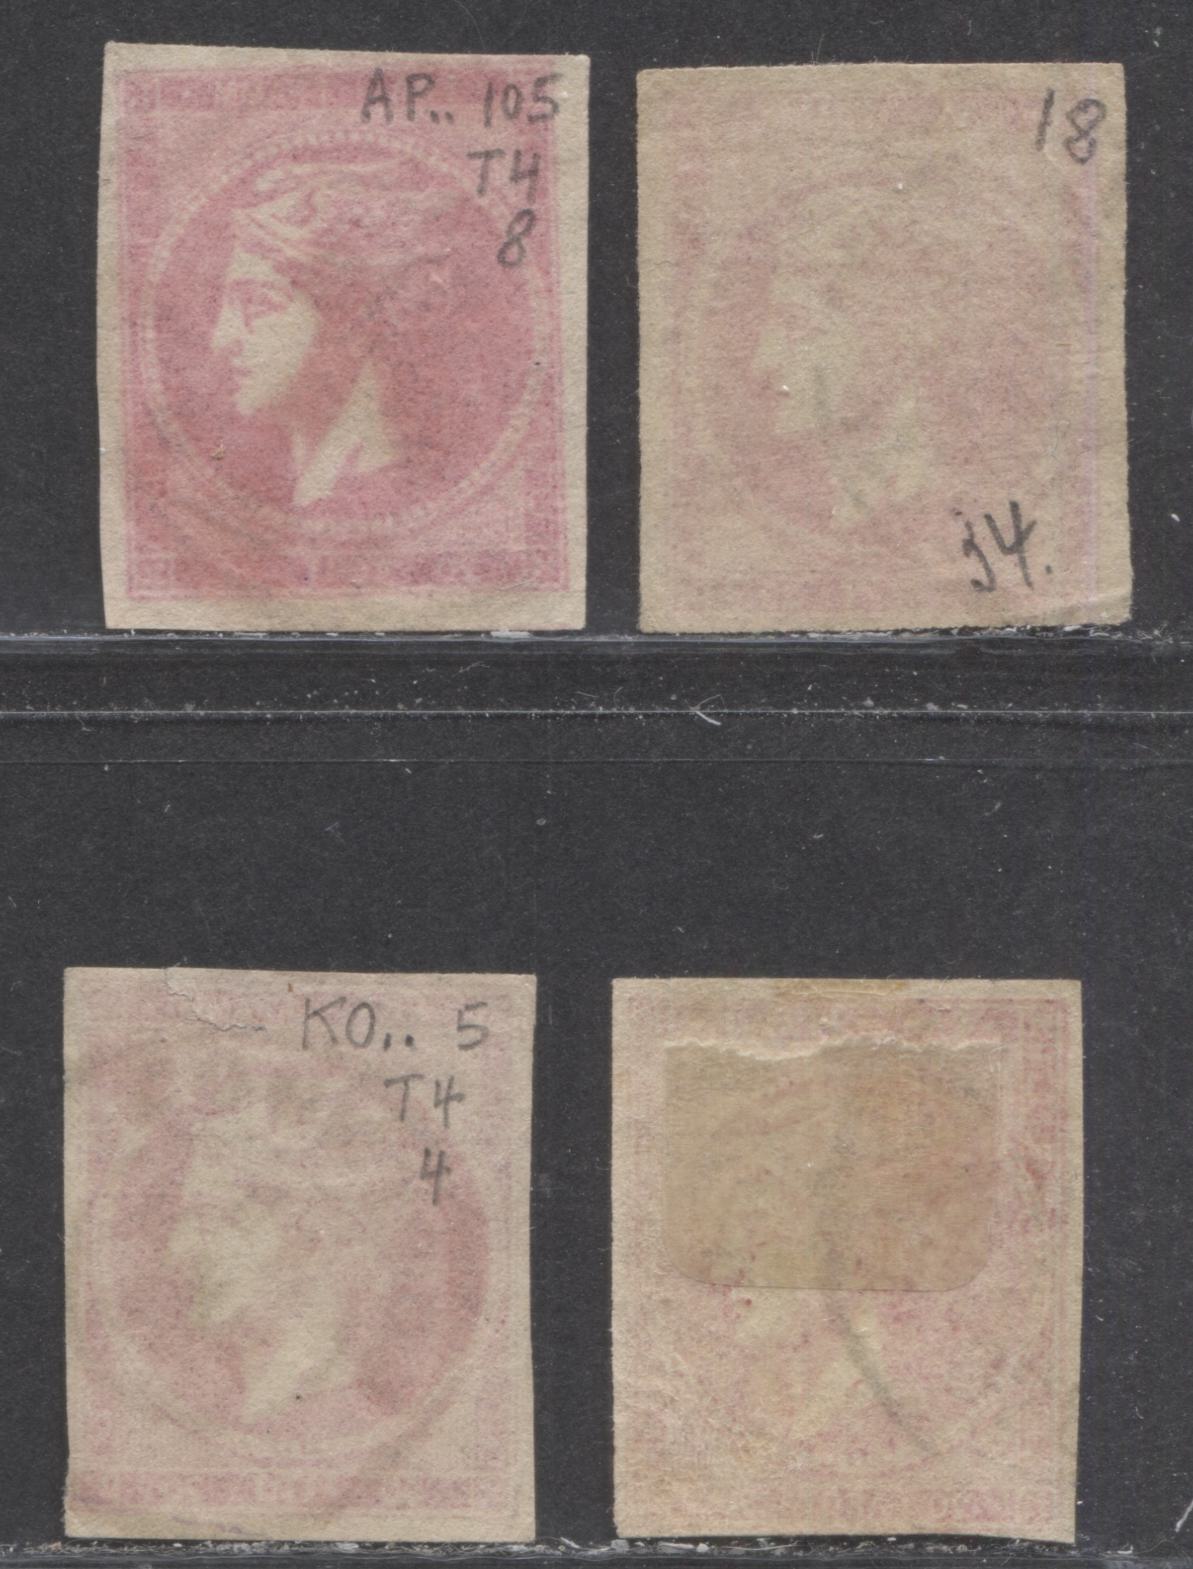 Lot 90 Greece SC#56a 20l Aniline Rose On Cream Paper, No Control Numbers 1880-1886 Large Hermes Head Issue, 1886 CDS Cancels, 4 Fine Used Examples, Click on Listing to See ALL Pictures, Estimated Value $16 USD